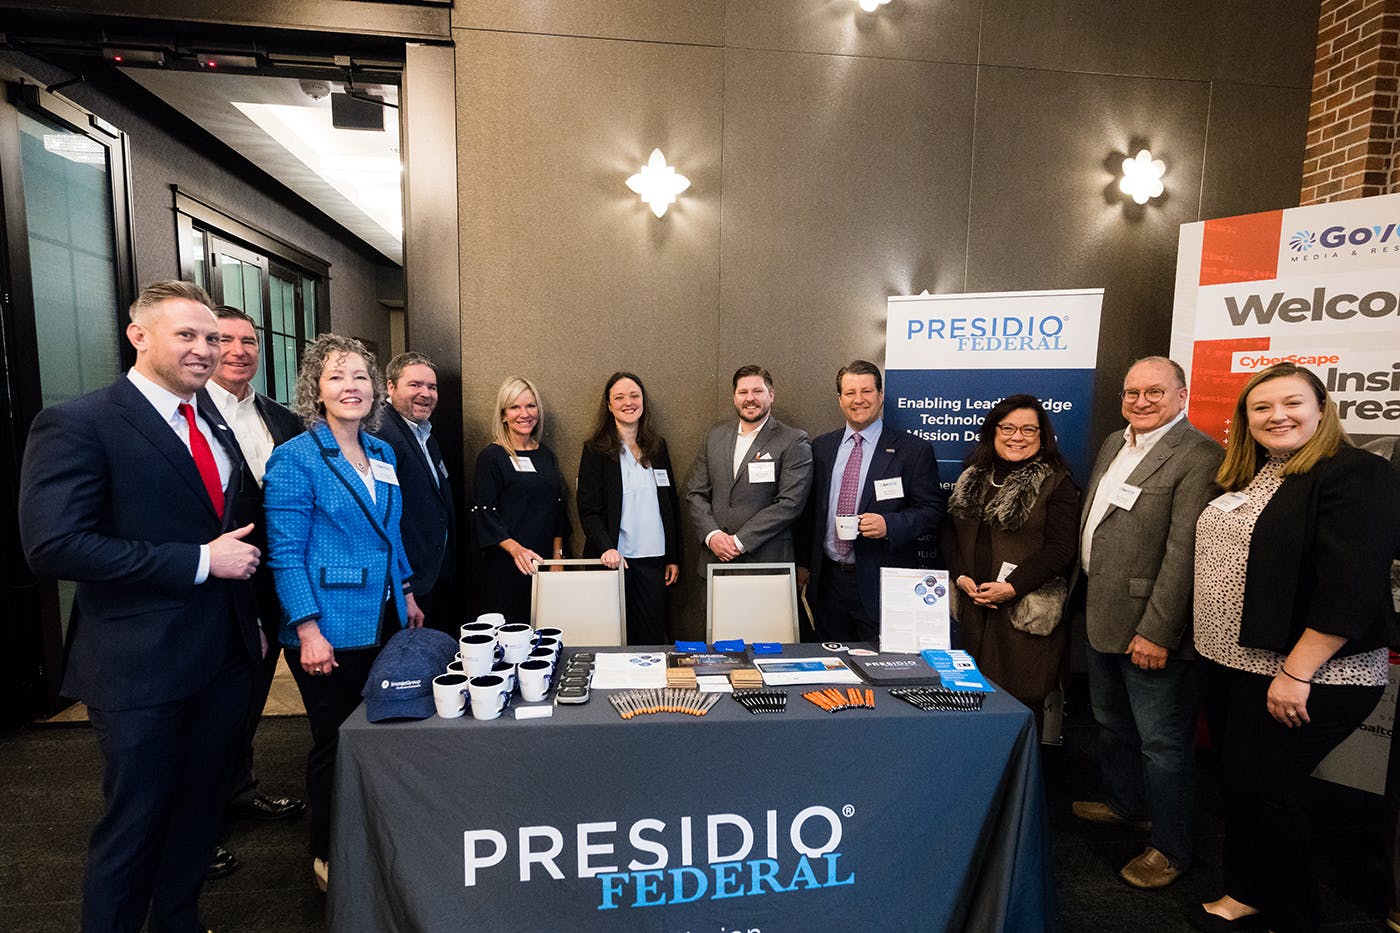 Event sponsors Presidio Federal, Palo Alto Networks and immix Group